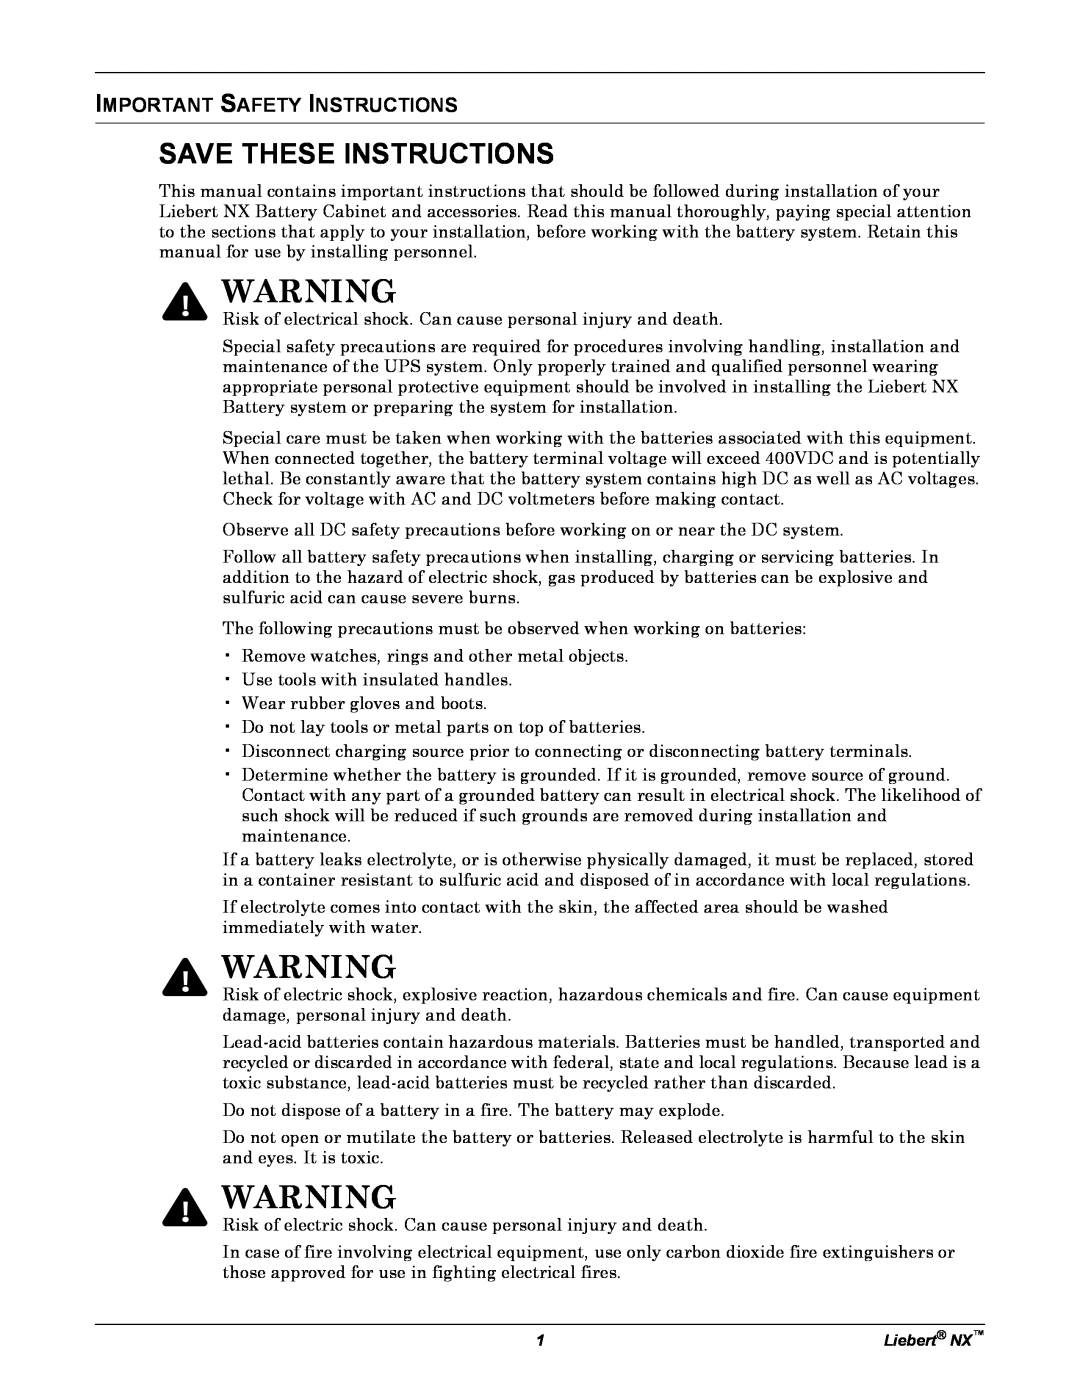 Emerson 225-600KVA installation manual Important Safety Instructions, Save These Instructions 